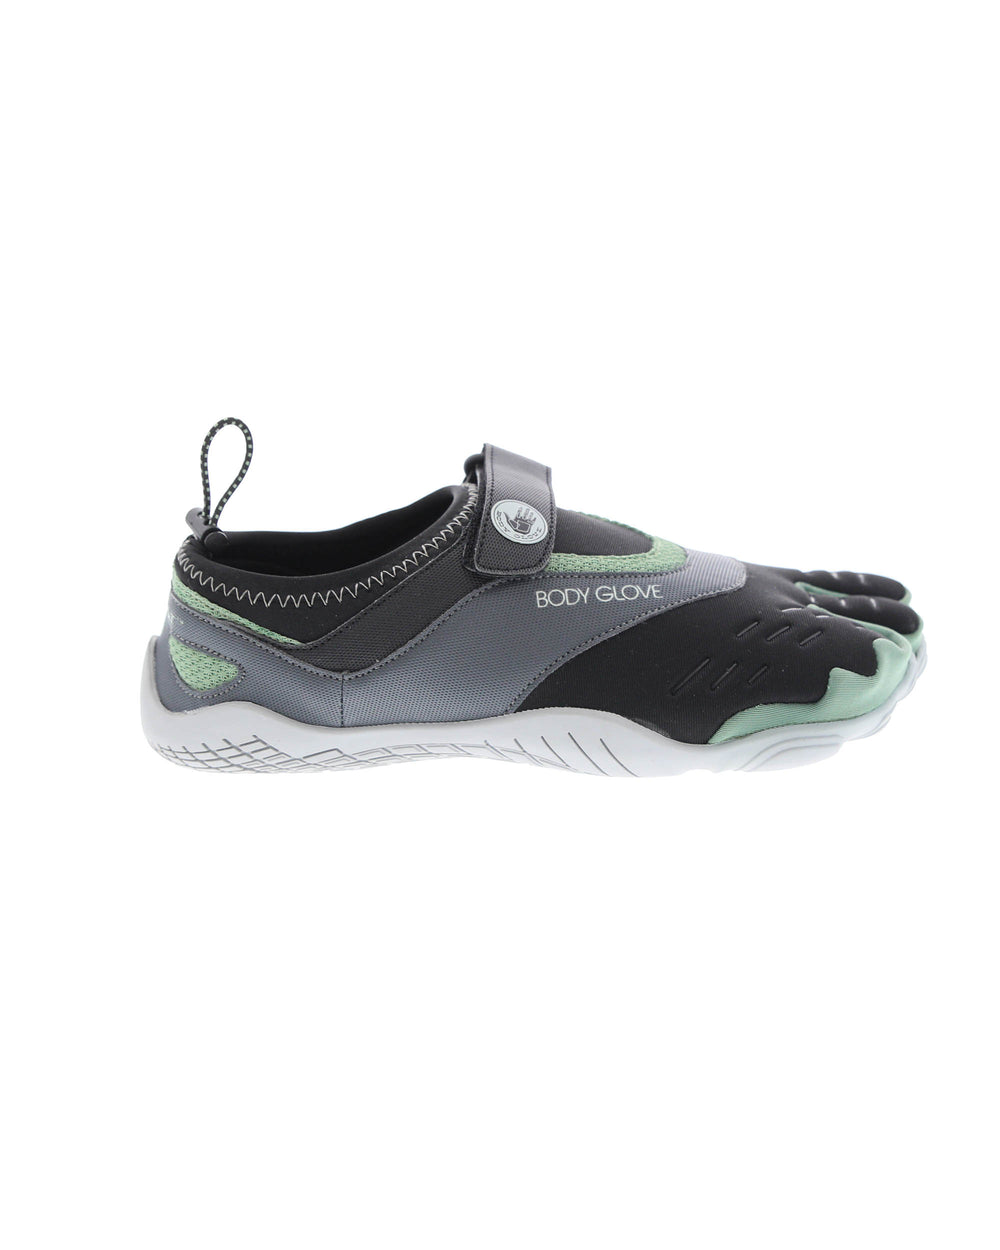 Men's 3T Barefoot Max Water Shoes - Black/Agave